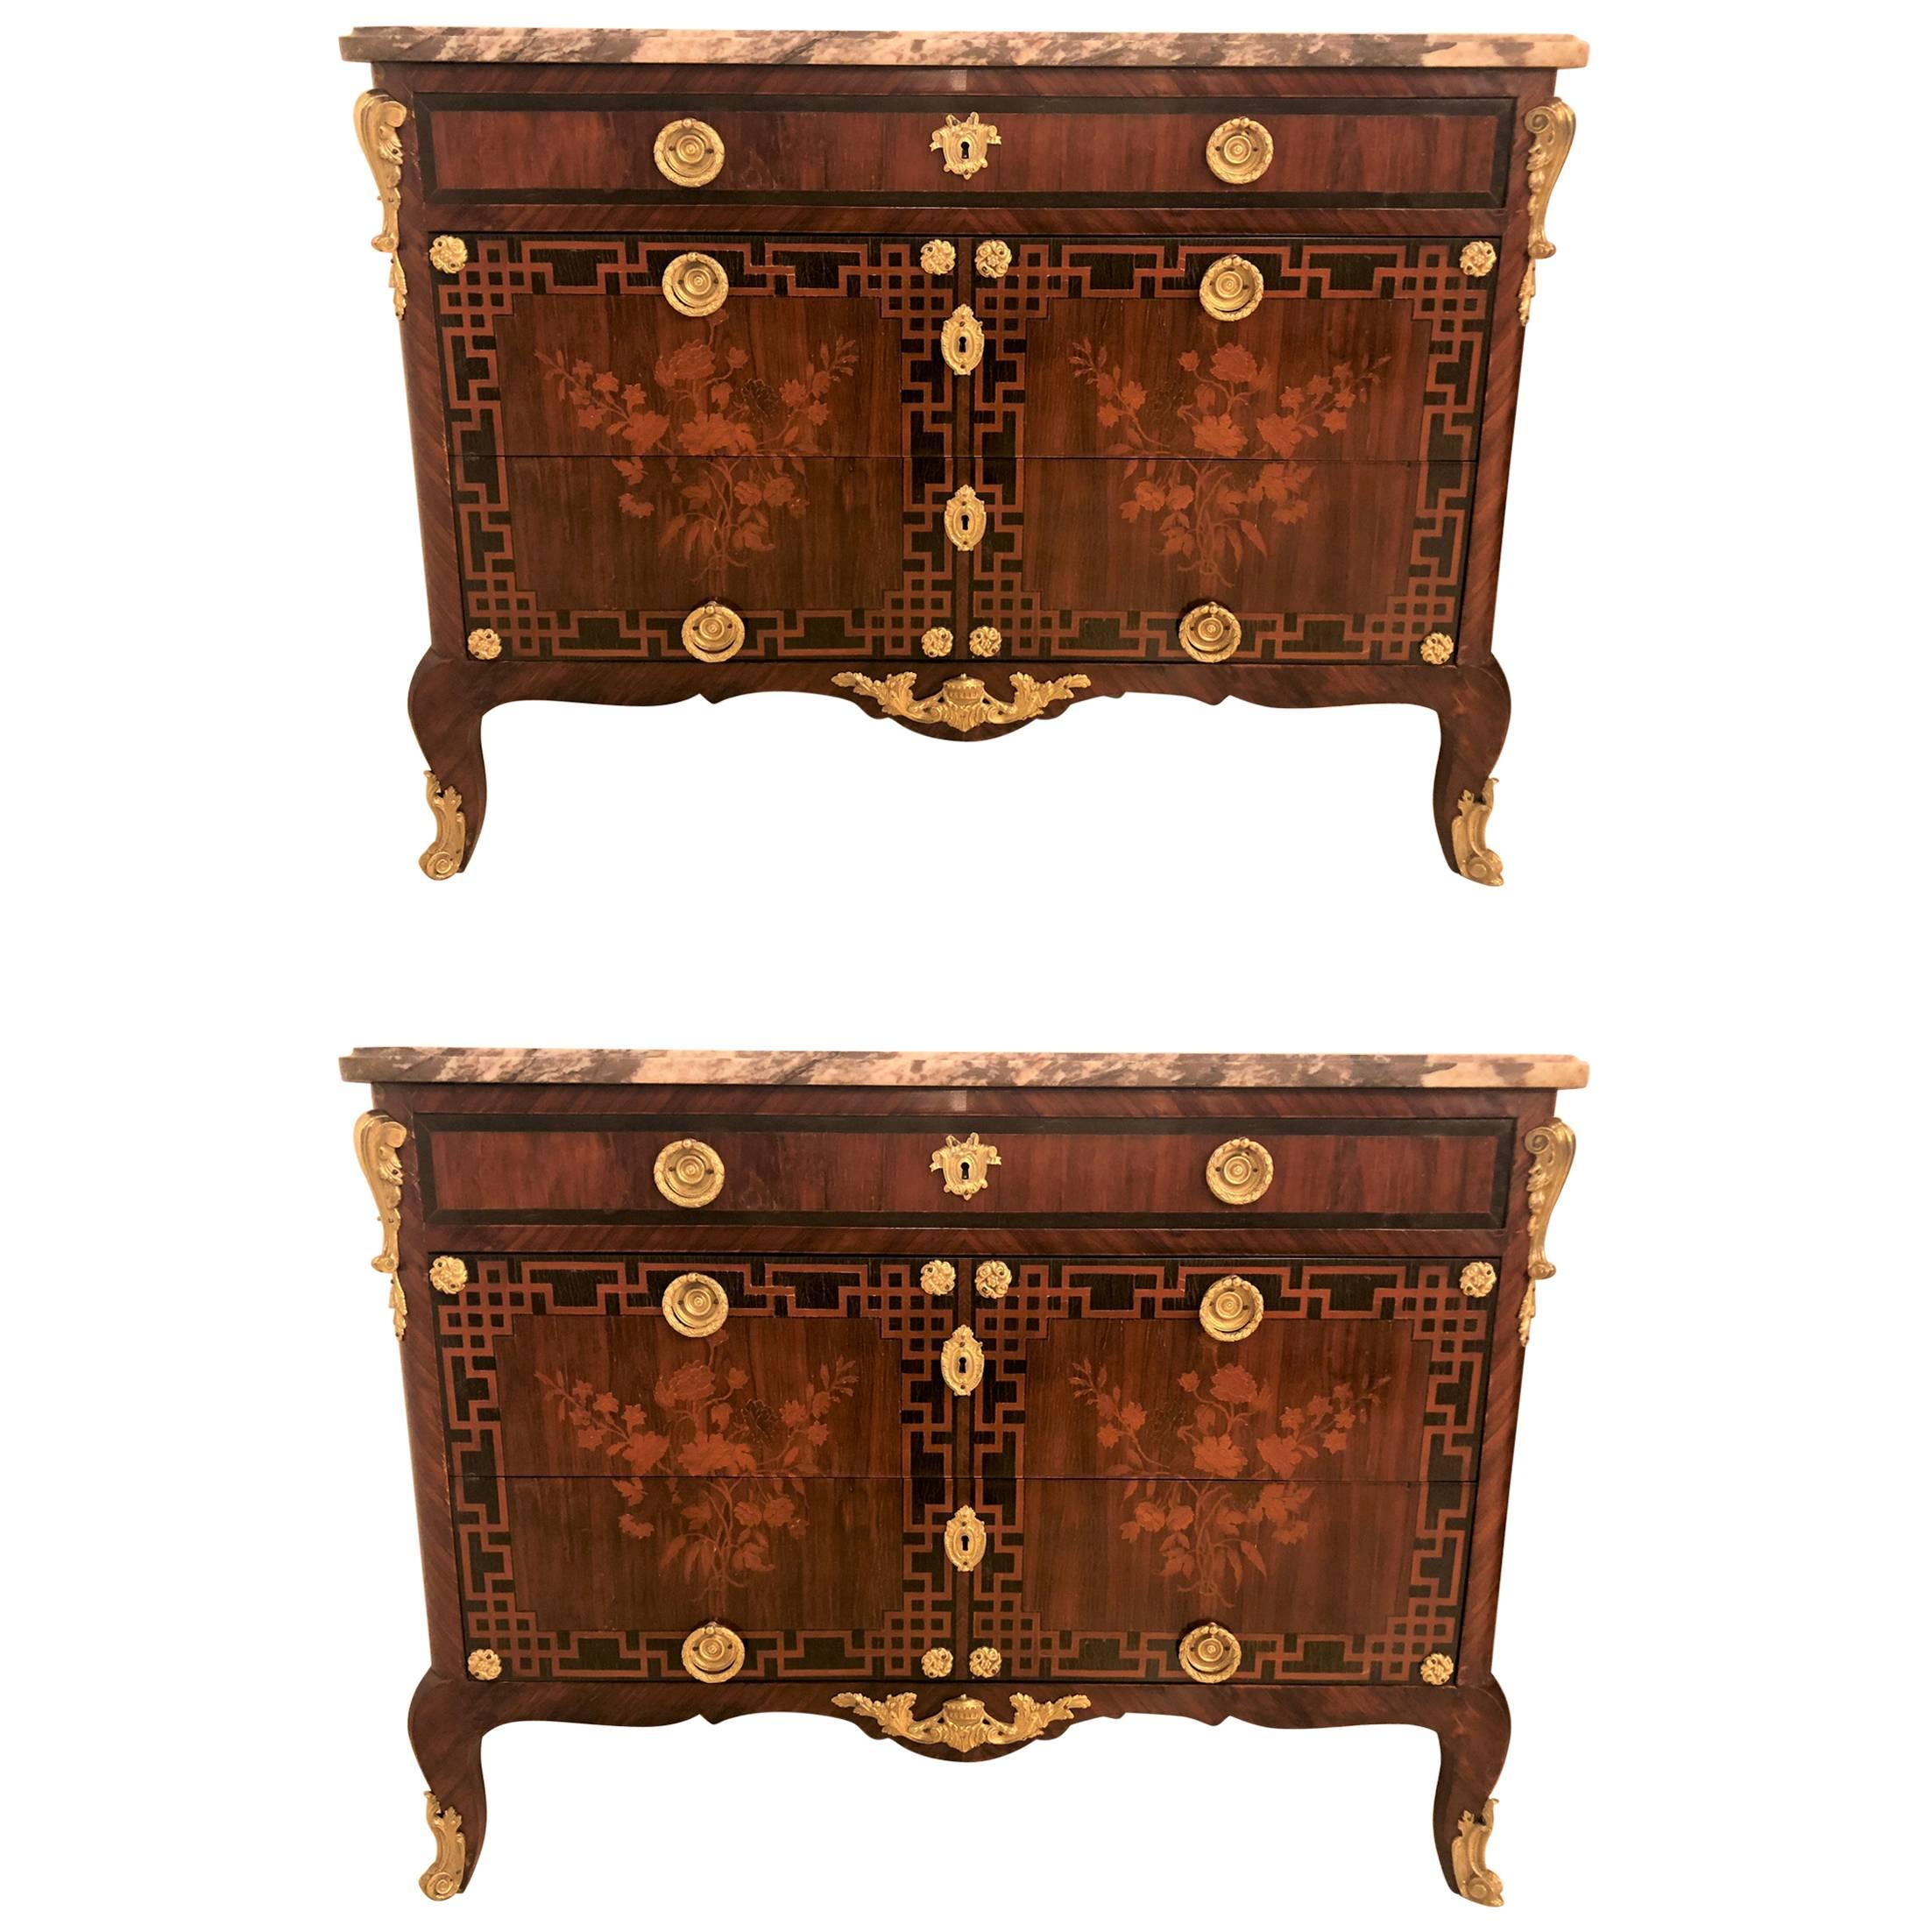 Pair of Louis XV Style Antique French Floral Inlaid Marble-Top Commode or Chests